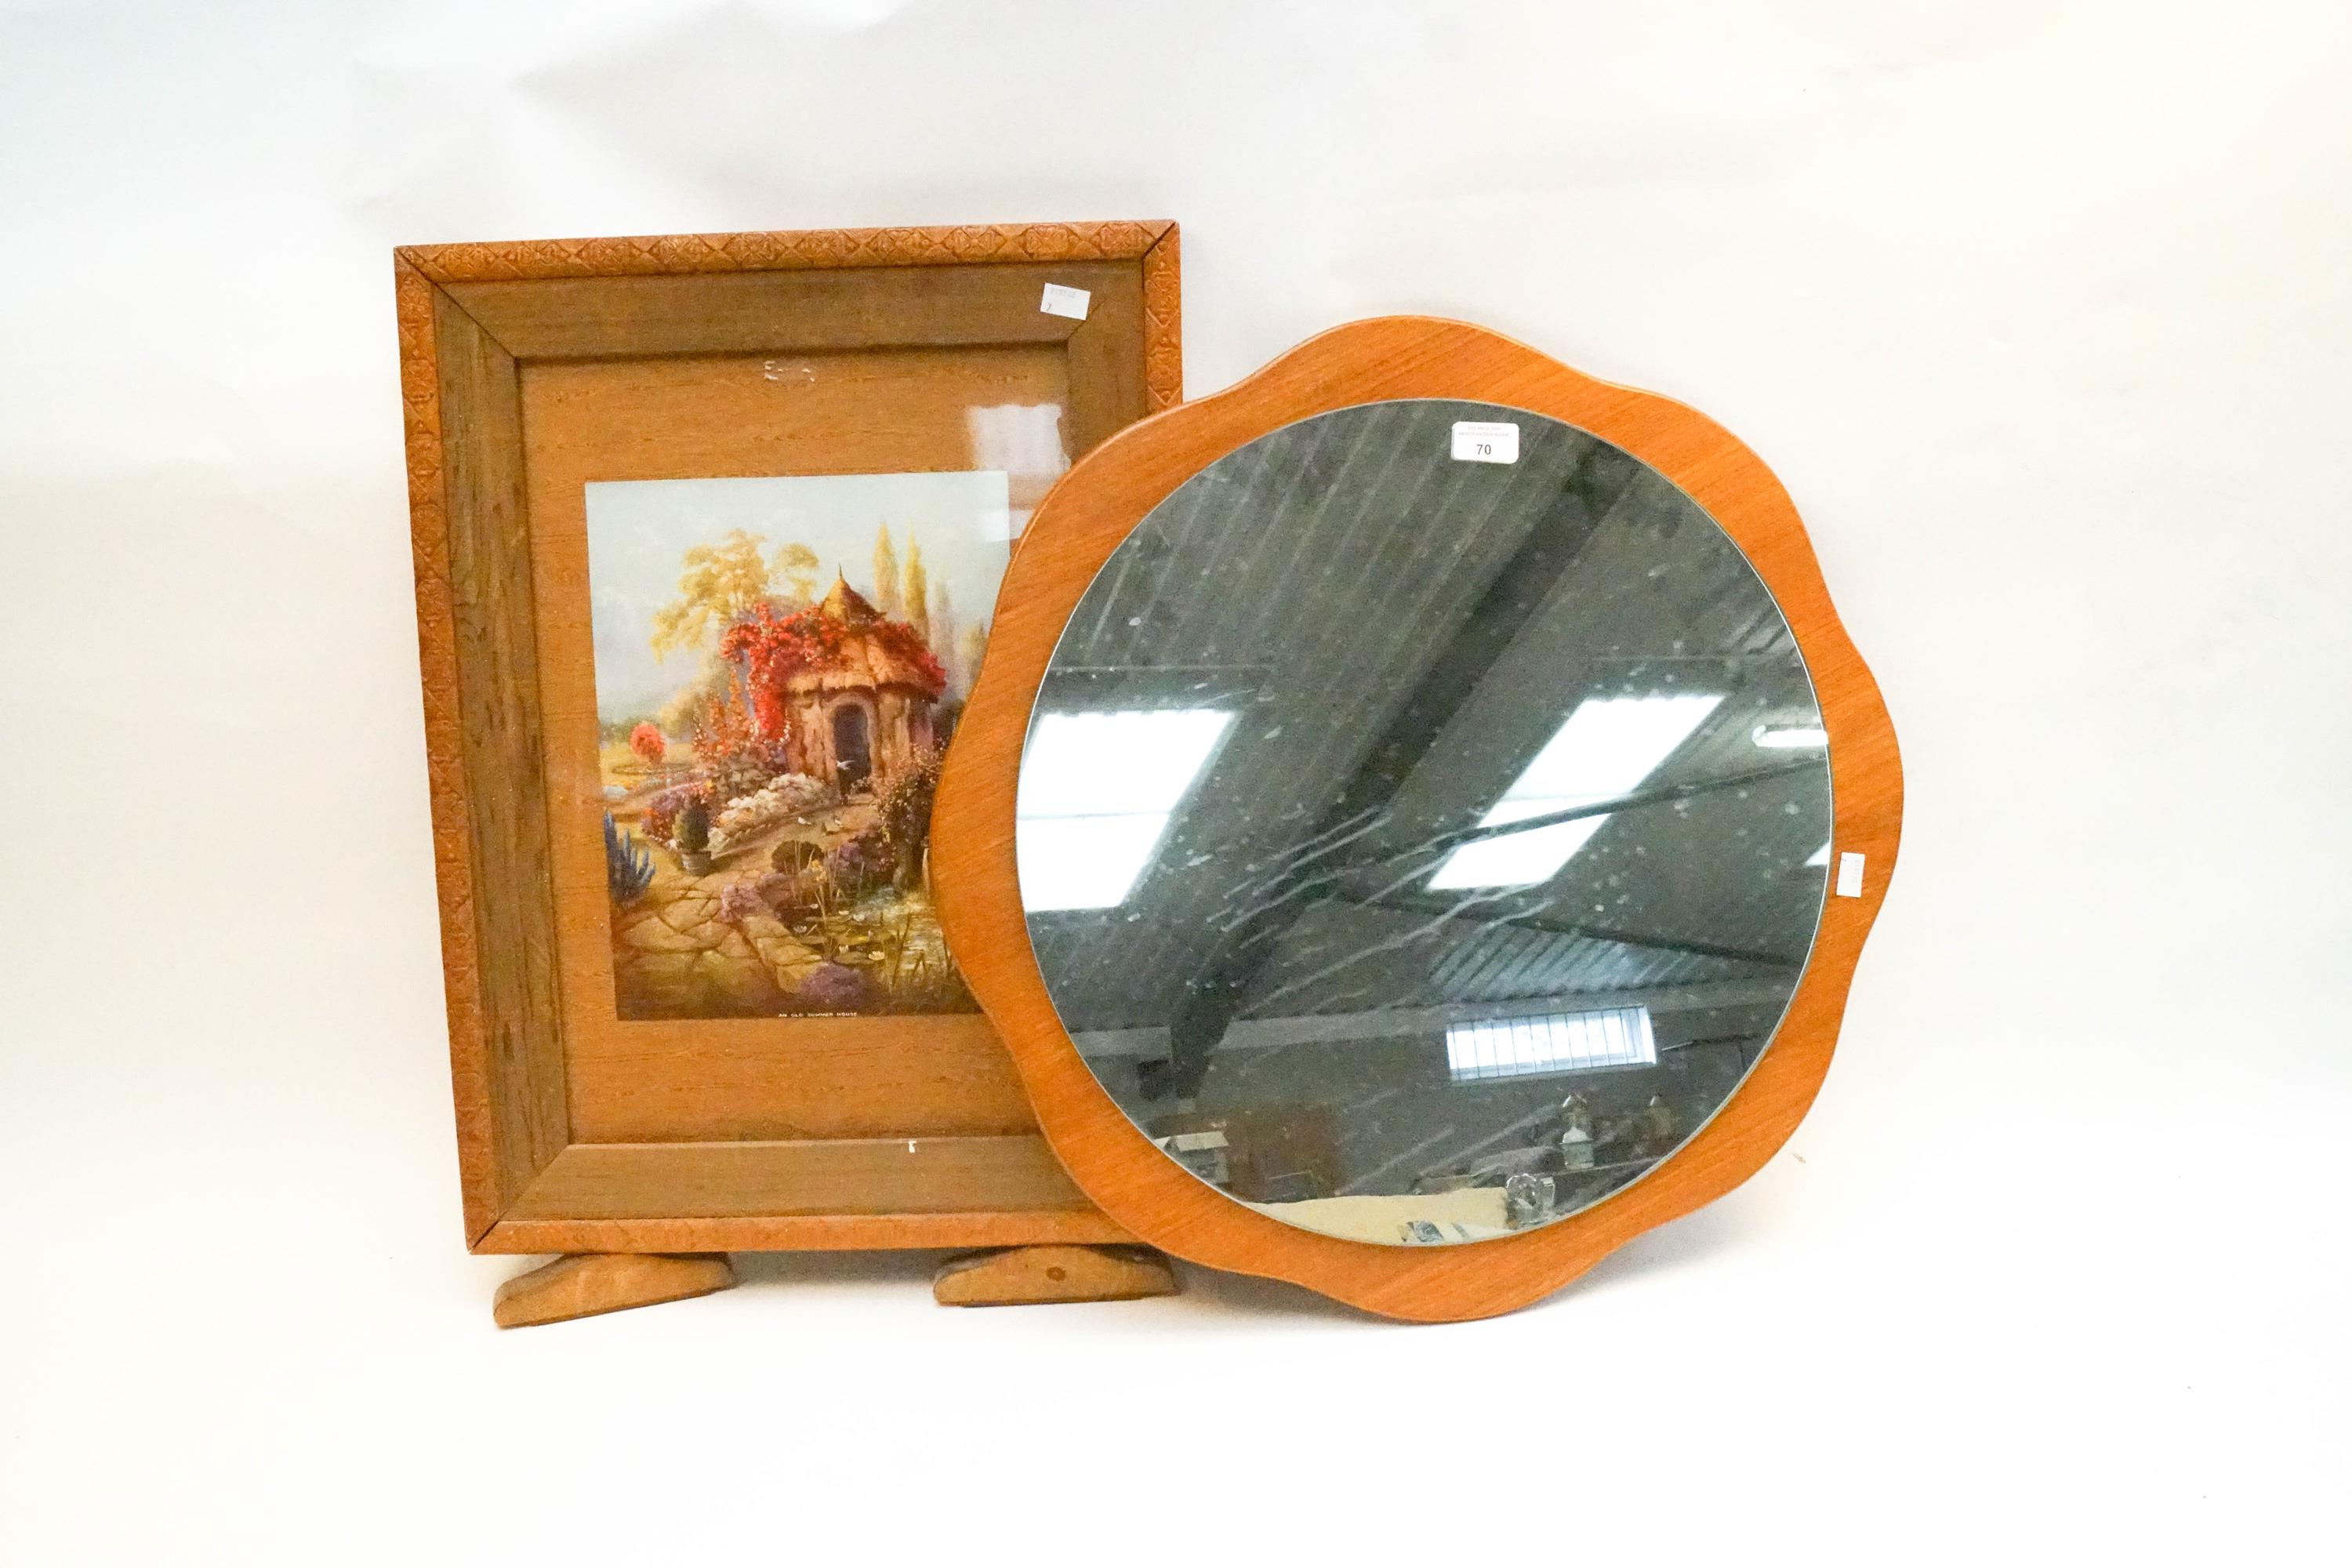 A fire screen and a mirror